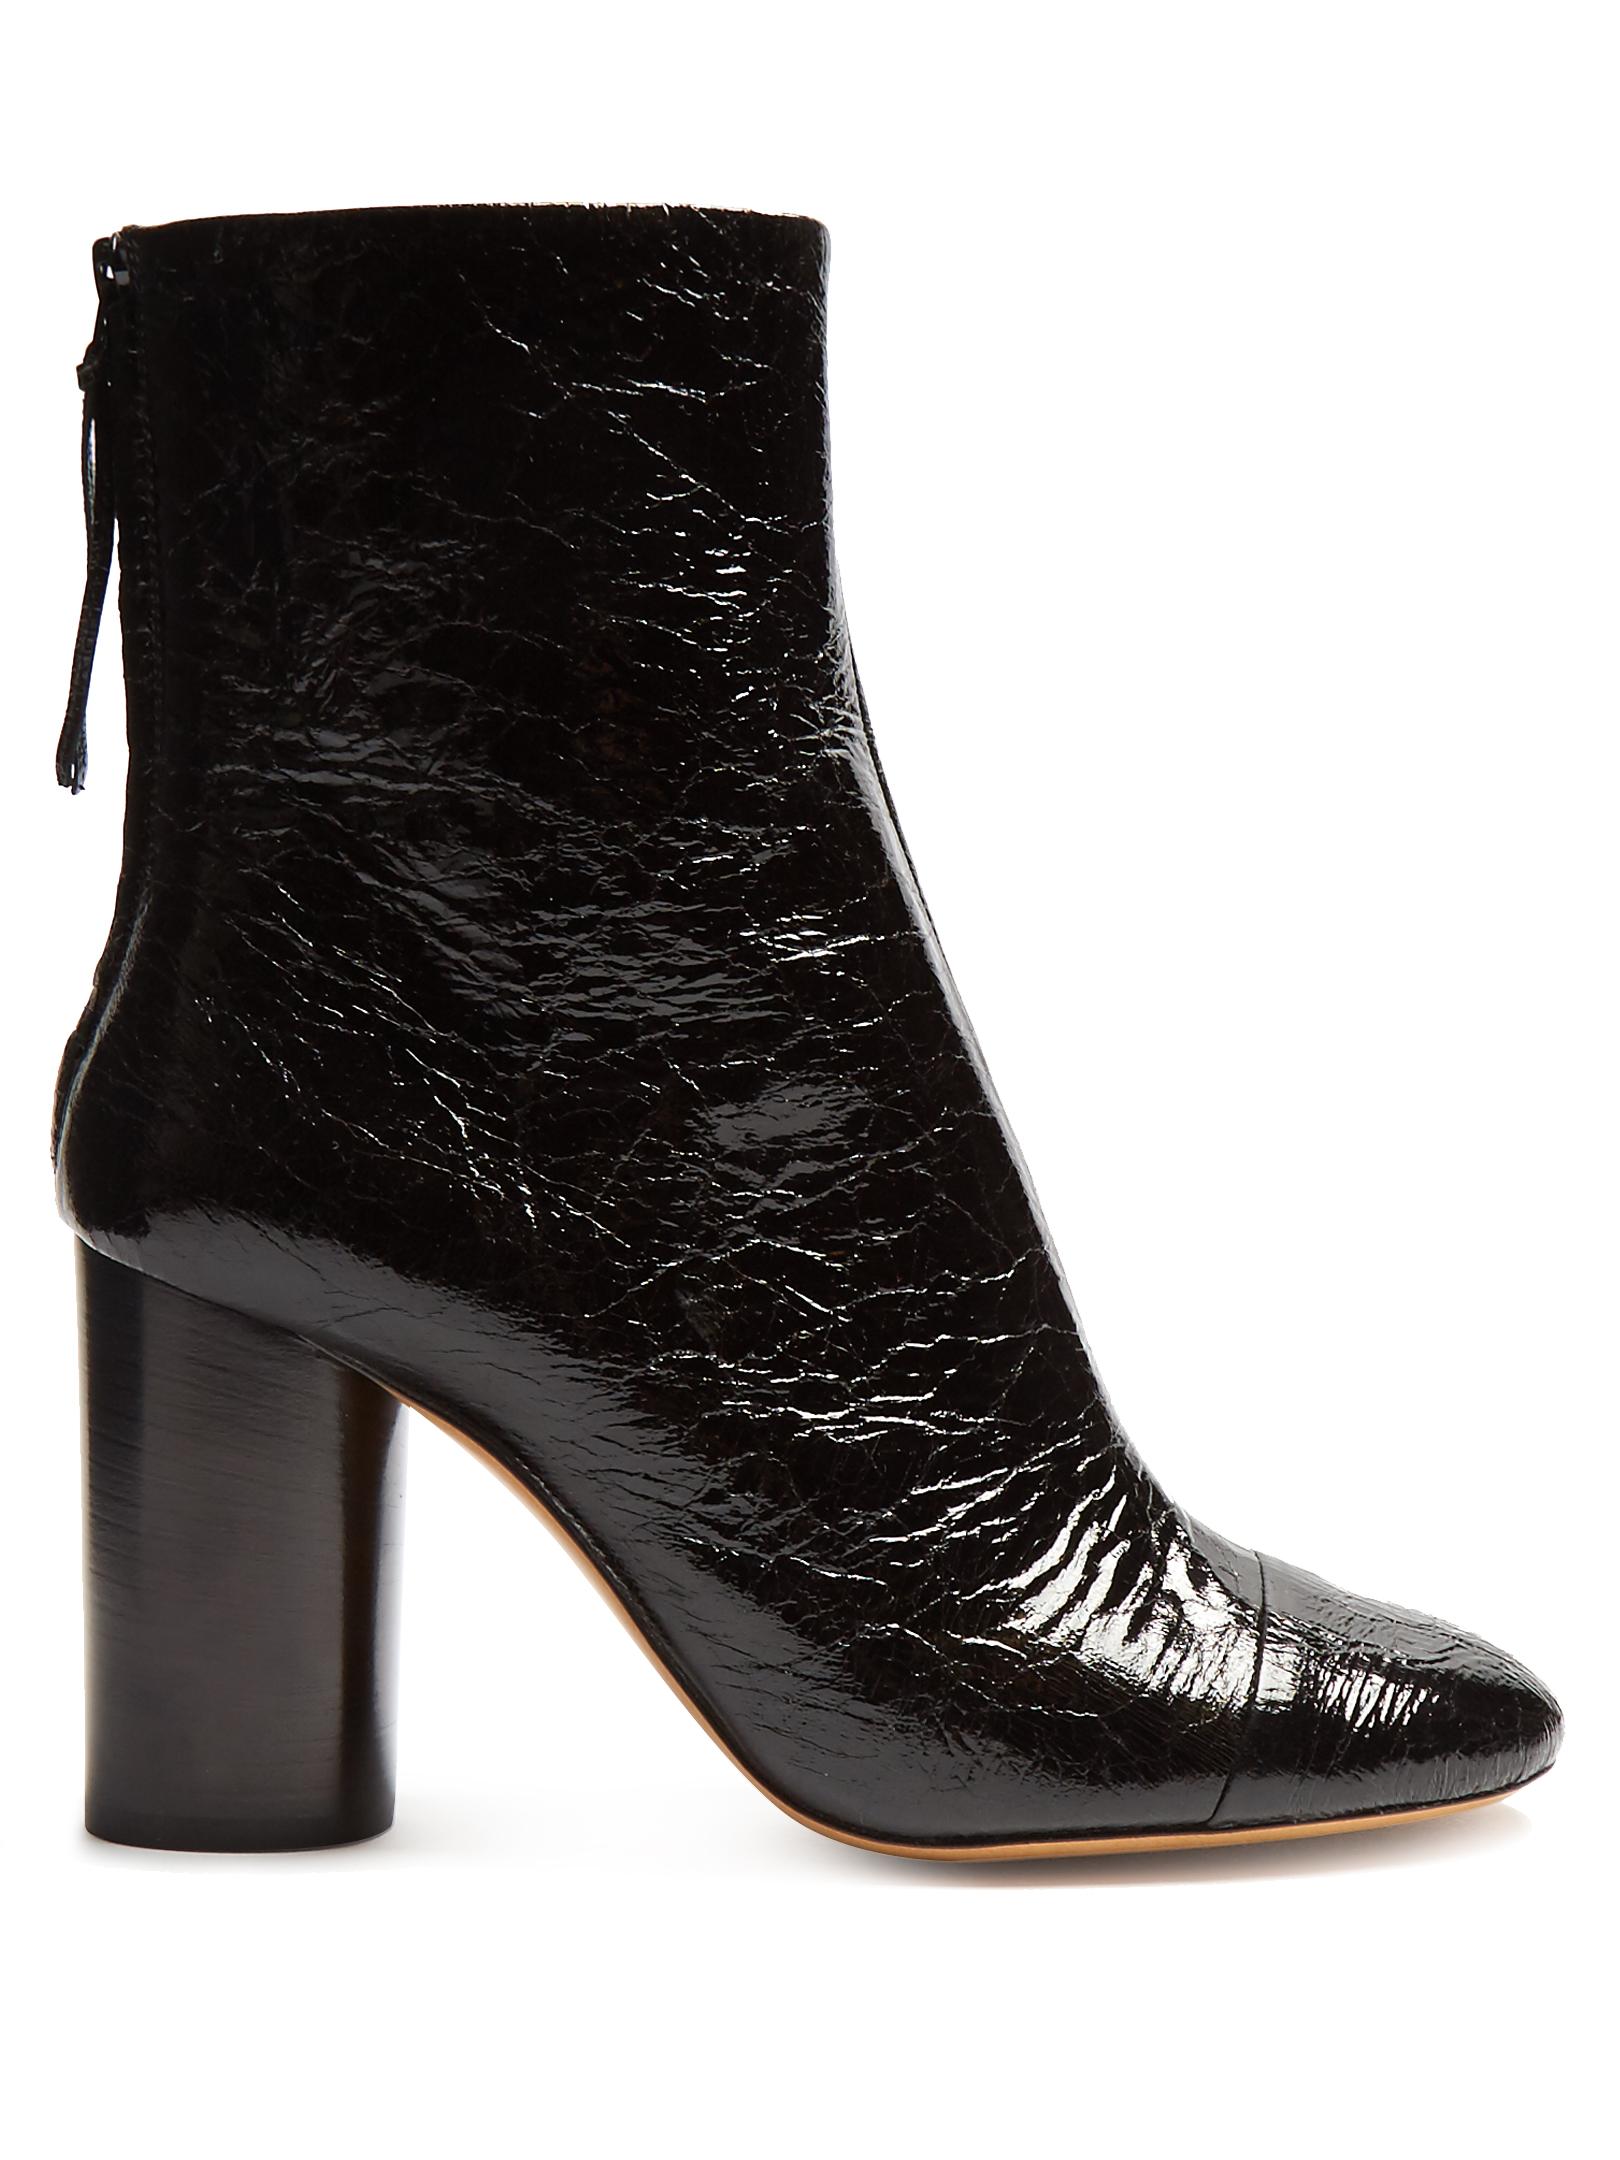 Isabel marant Grover Crinkle Patent-leather Ankle Boots in Black | Lyst